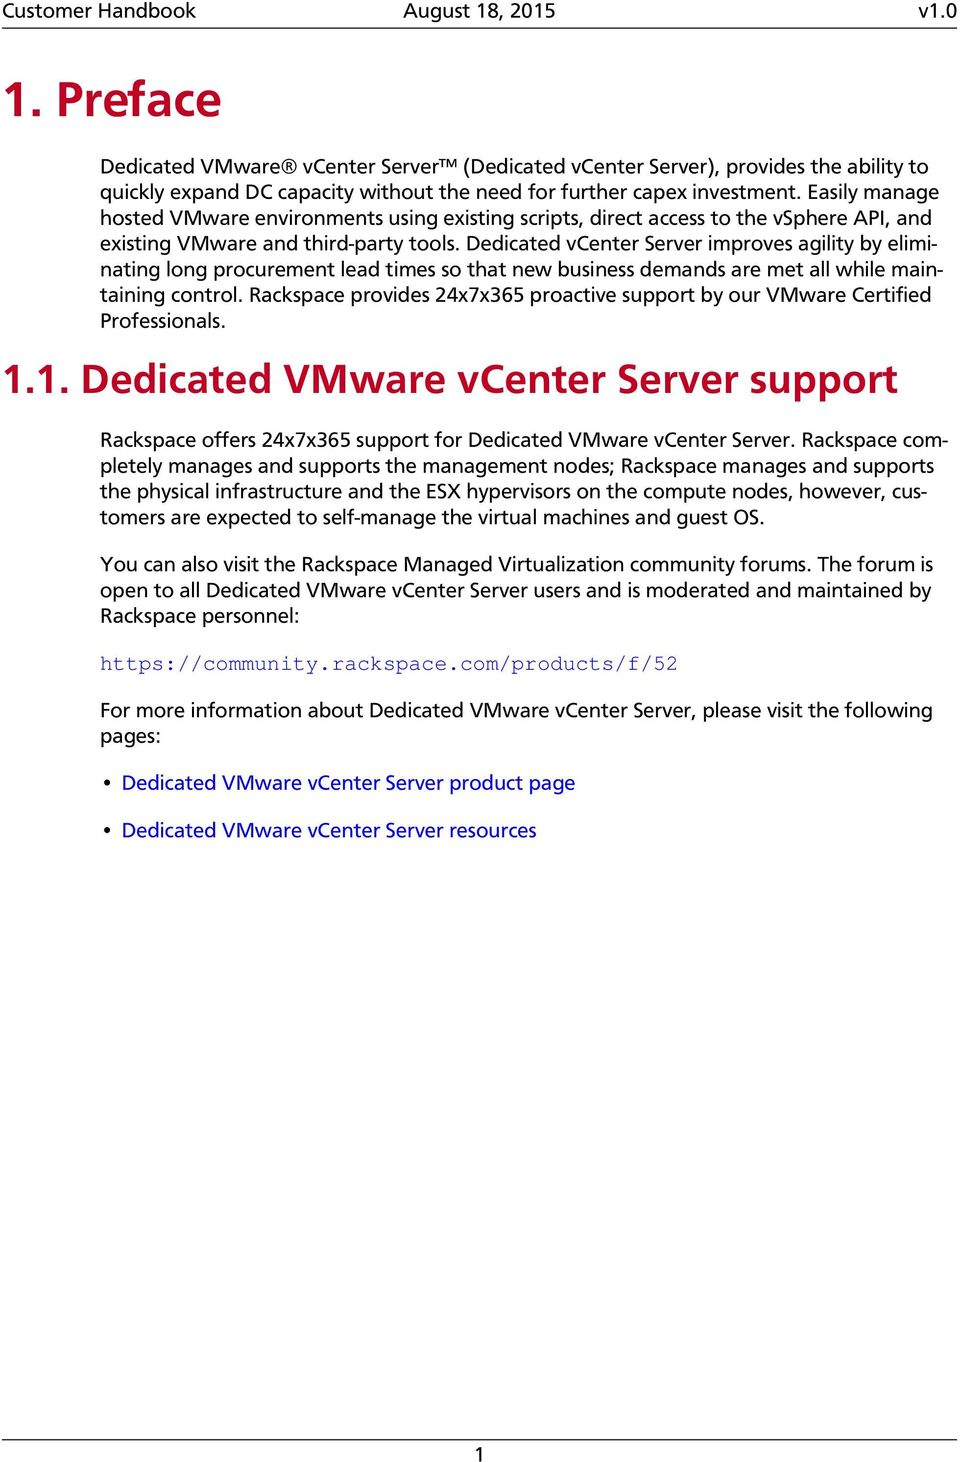 Dedicated vcenter Server improves agility by eliminating long procurement lead times so that new business demands are met all while maintaining control.